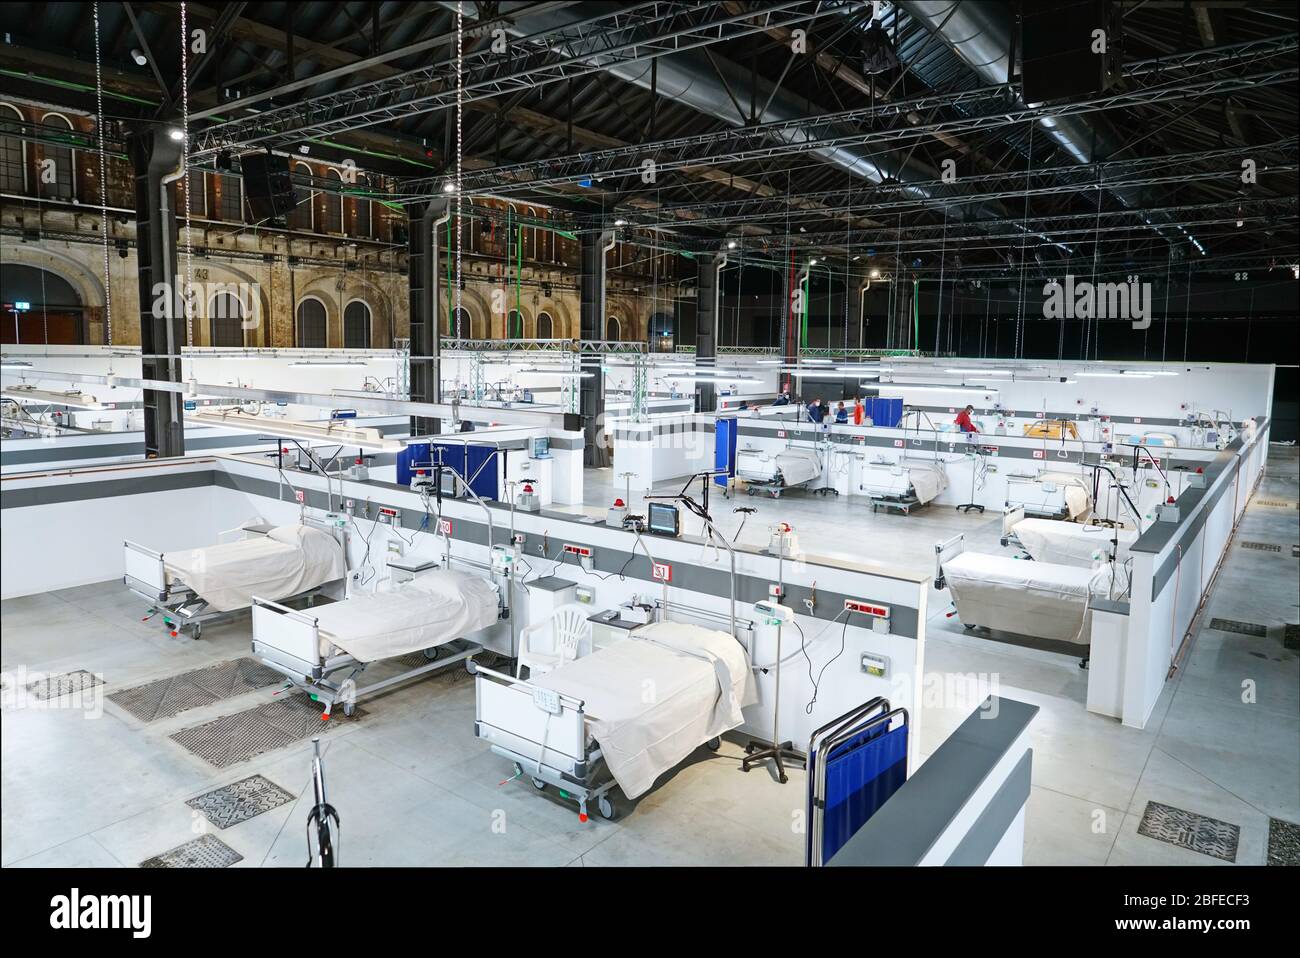 Covid field hospital, set up in a former industrial plant, with 90 beds equipped for coronavirus intensive therapy. Turin, Italy - April 2020 Stock Photo